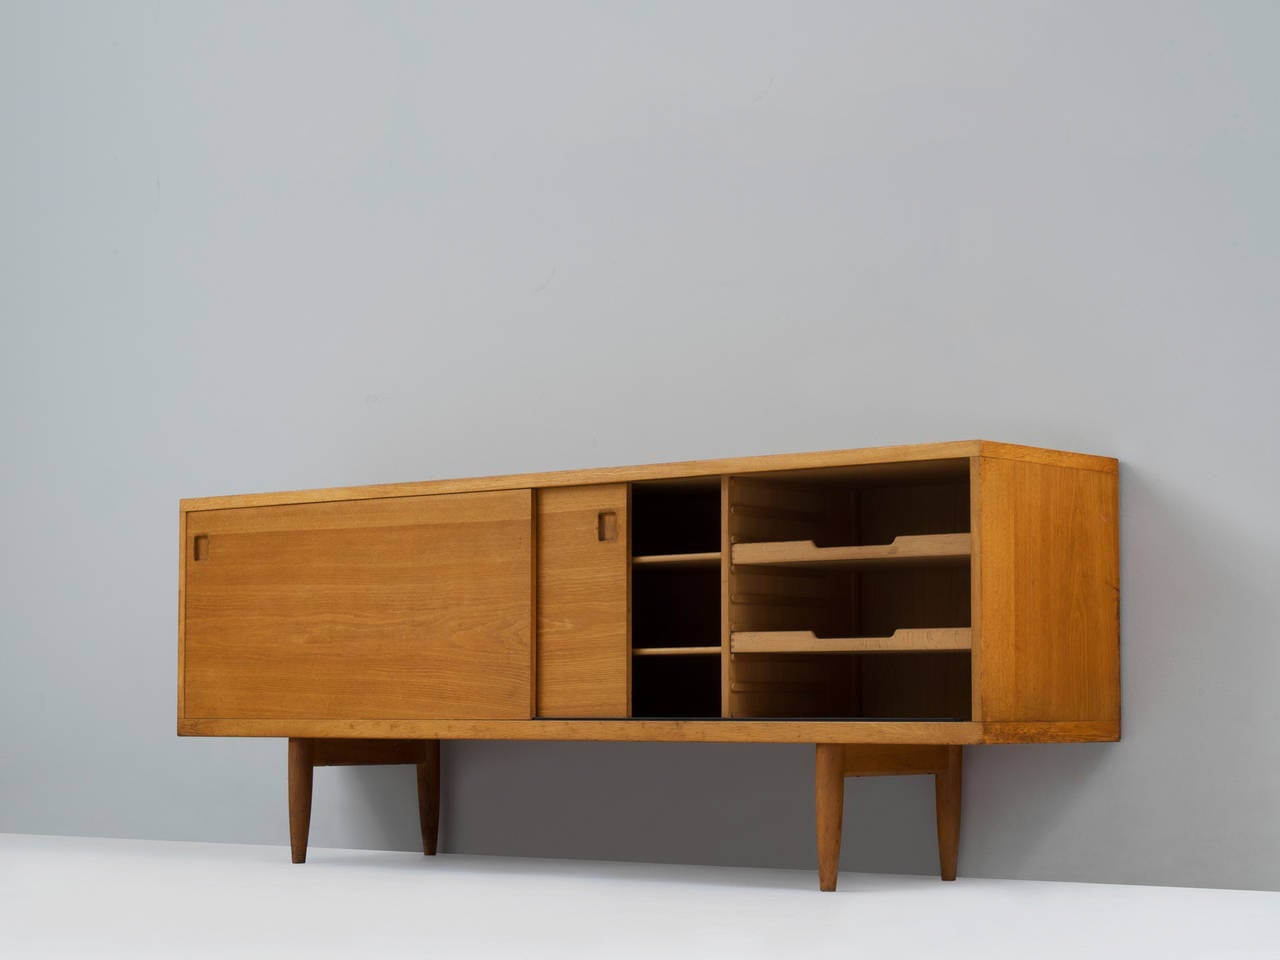 Niels O. Møller, sideboard, oak, Denmark, 1960s.

This lovely medium-sized sideboard is a Classic example of the craftsmanship of Danish Mid-modern design. At the same time, it stands for the Scandinavian Postwar vision of practical yet well-made